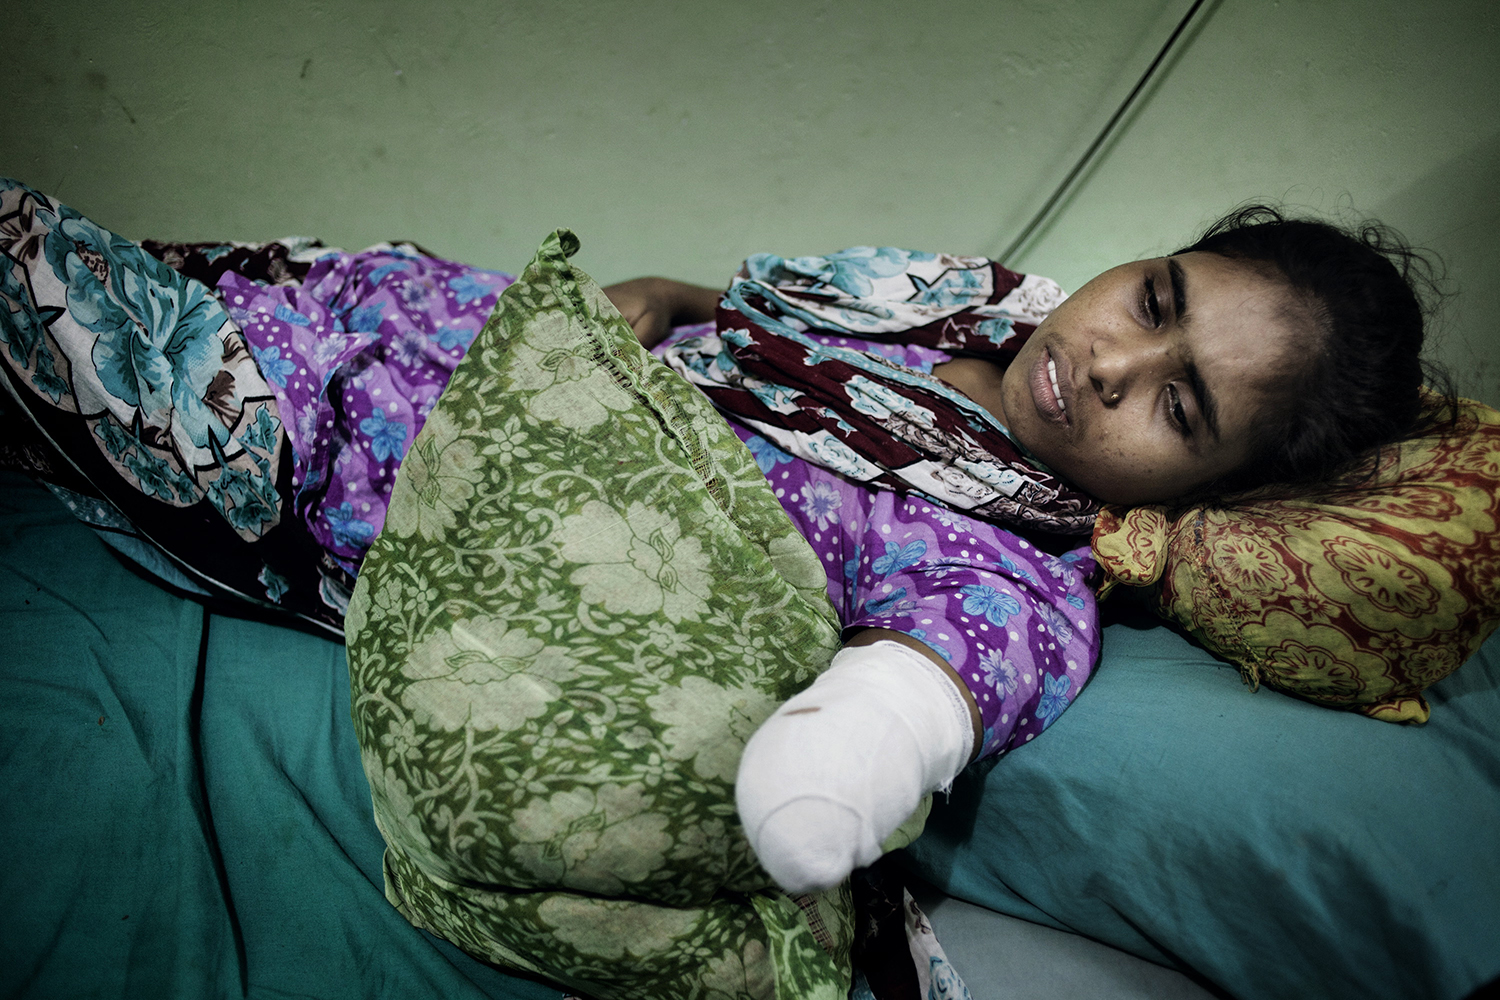 June 14, 2013. Rojina, 25, lost her arm under the rubble. To save her own life, Rojina tried to amputate it herself, Savar, Dhaka, Bangladesh.